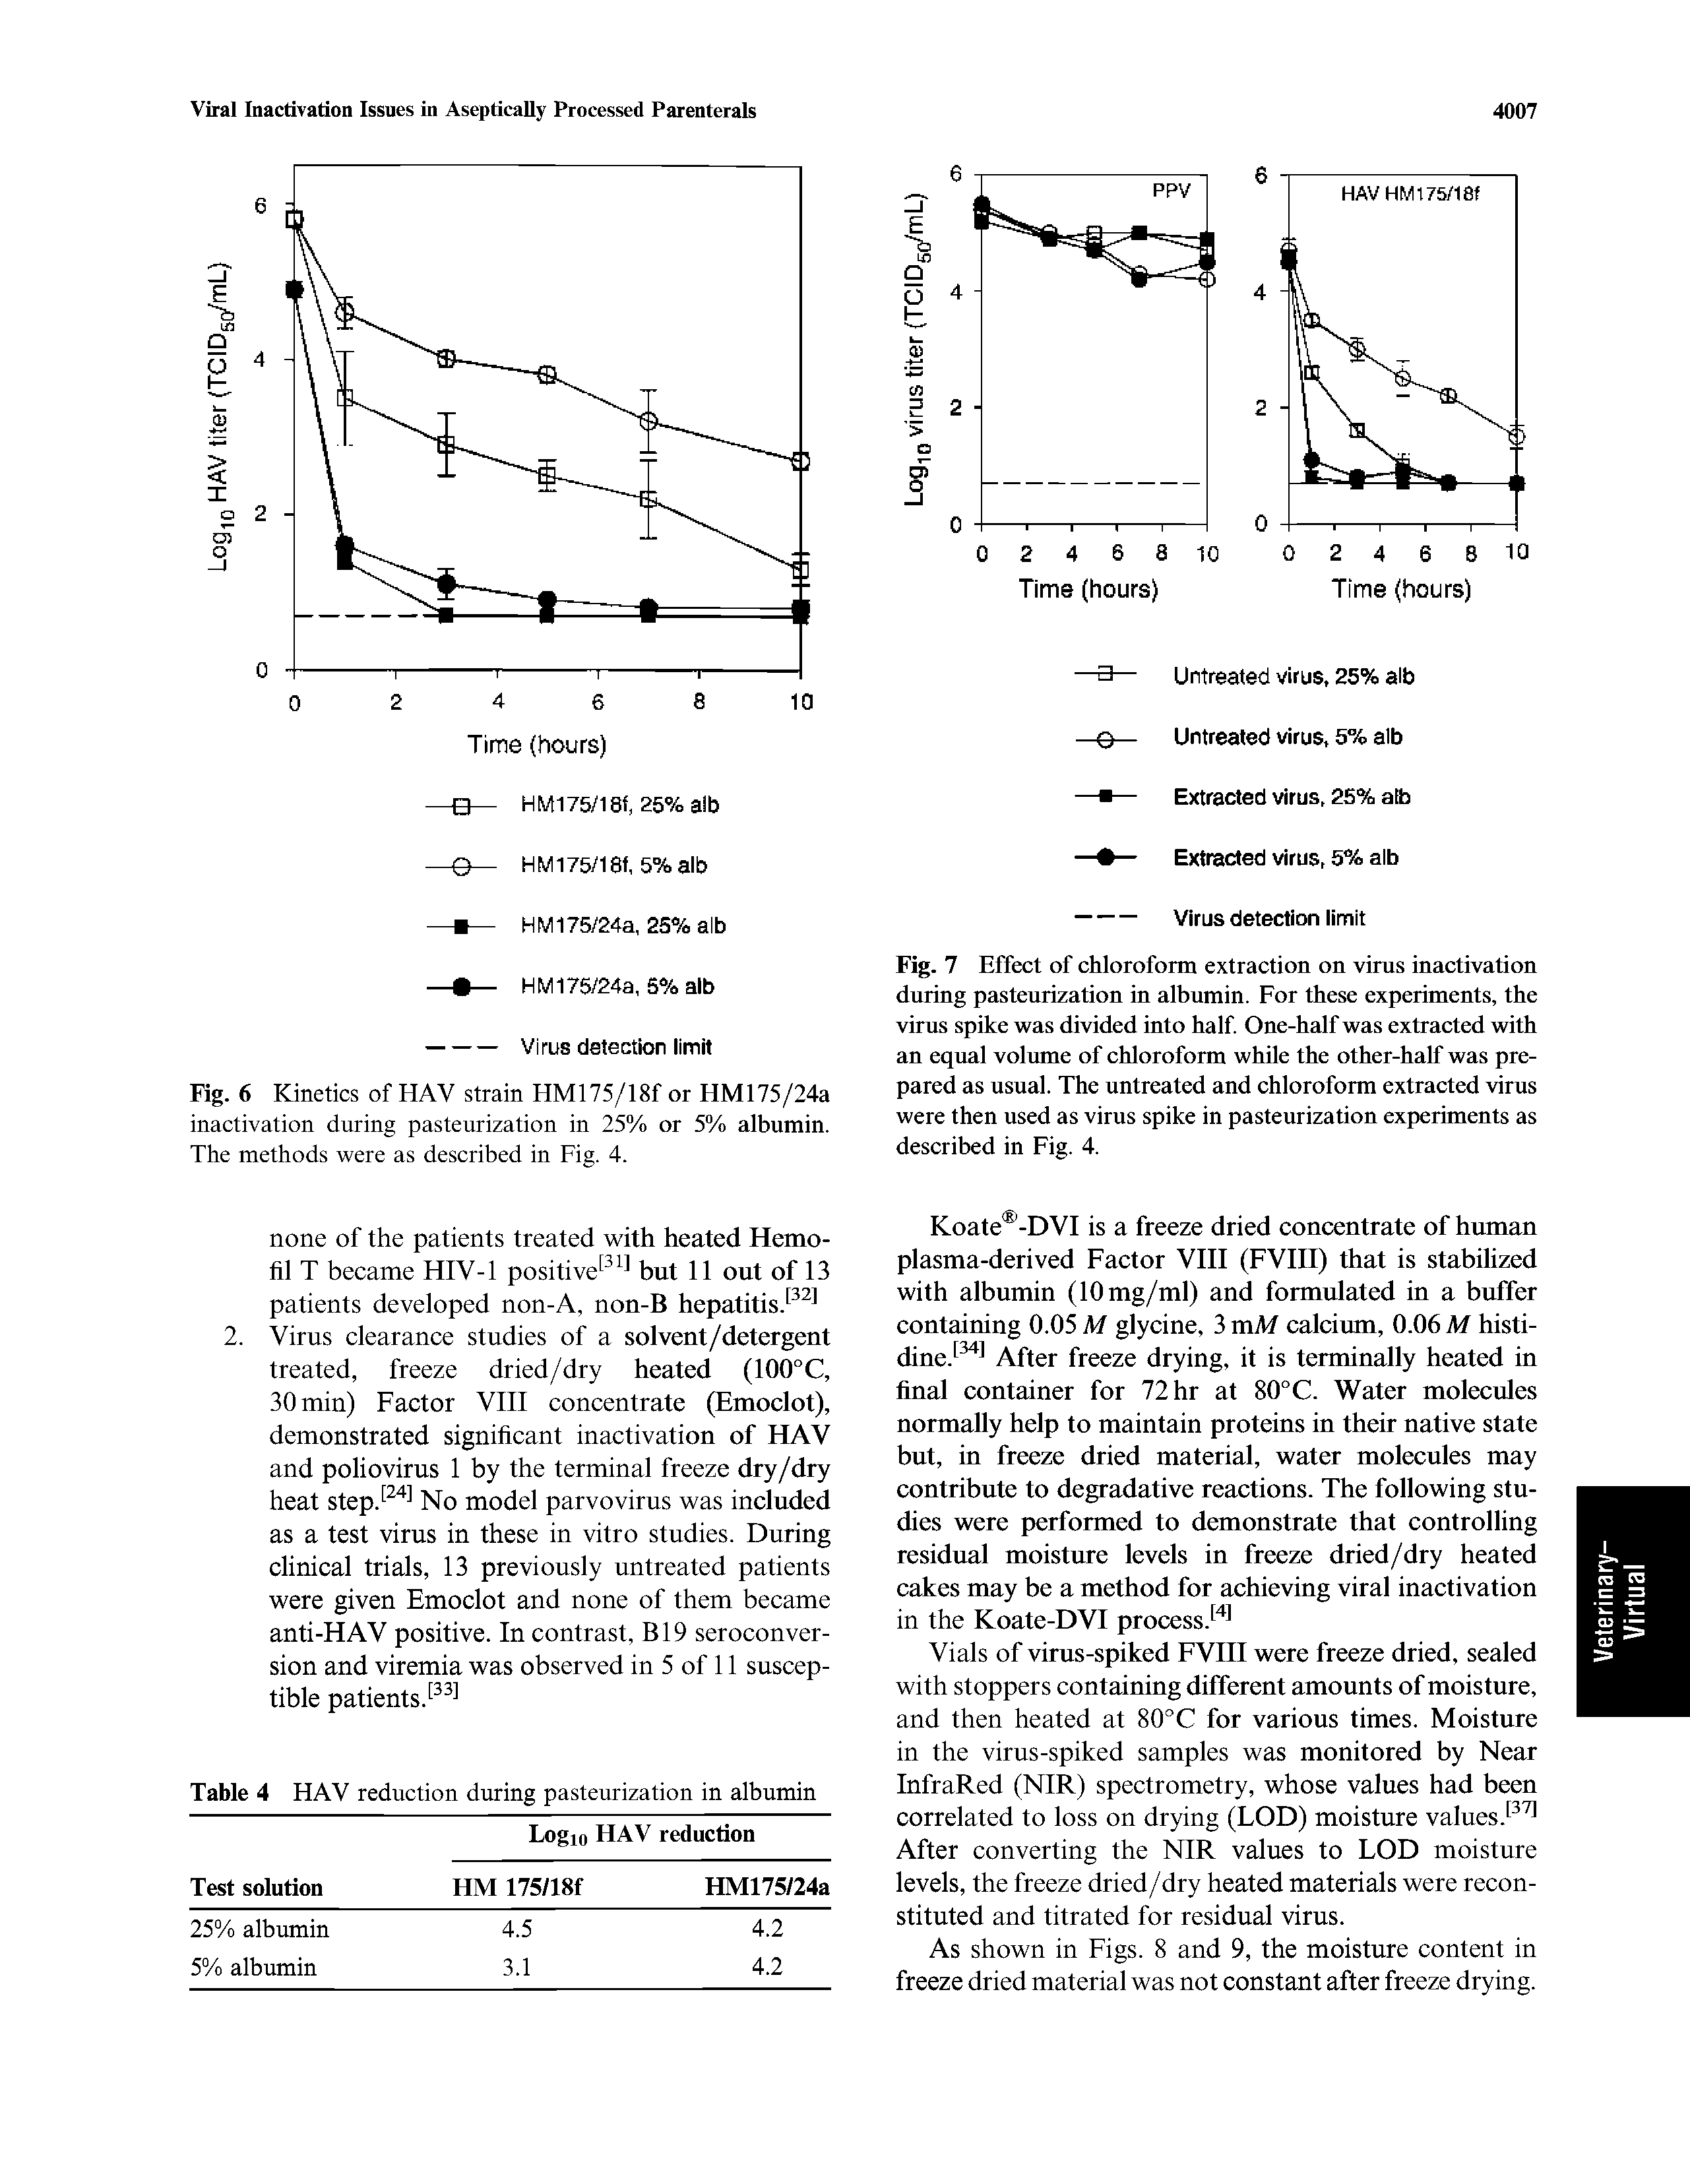 Fig. 7 Effect of chloroform extraction on virus inactivation during pasteurization in albumin. For these experiments, the virus spike was divided into half. One-half was extracted with an equal volume of chloroform while the other-half was prepared as usual. The untreated and chloroform extracted virus were then used as virus spike in pasteurization experiments as described in Fig. 4.